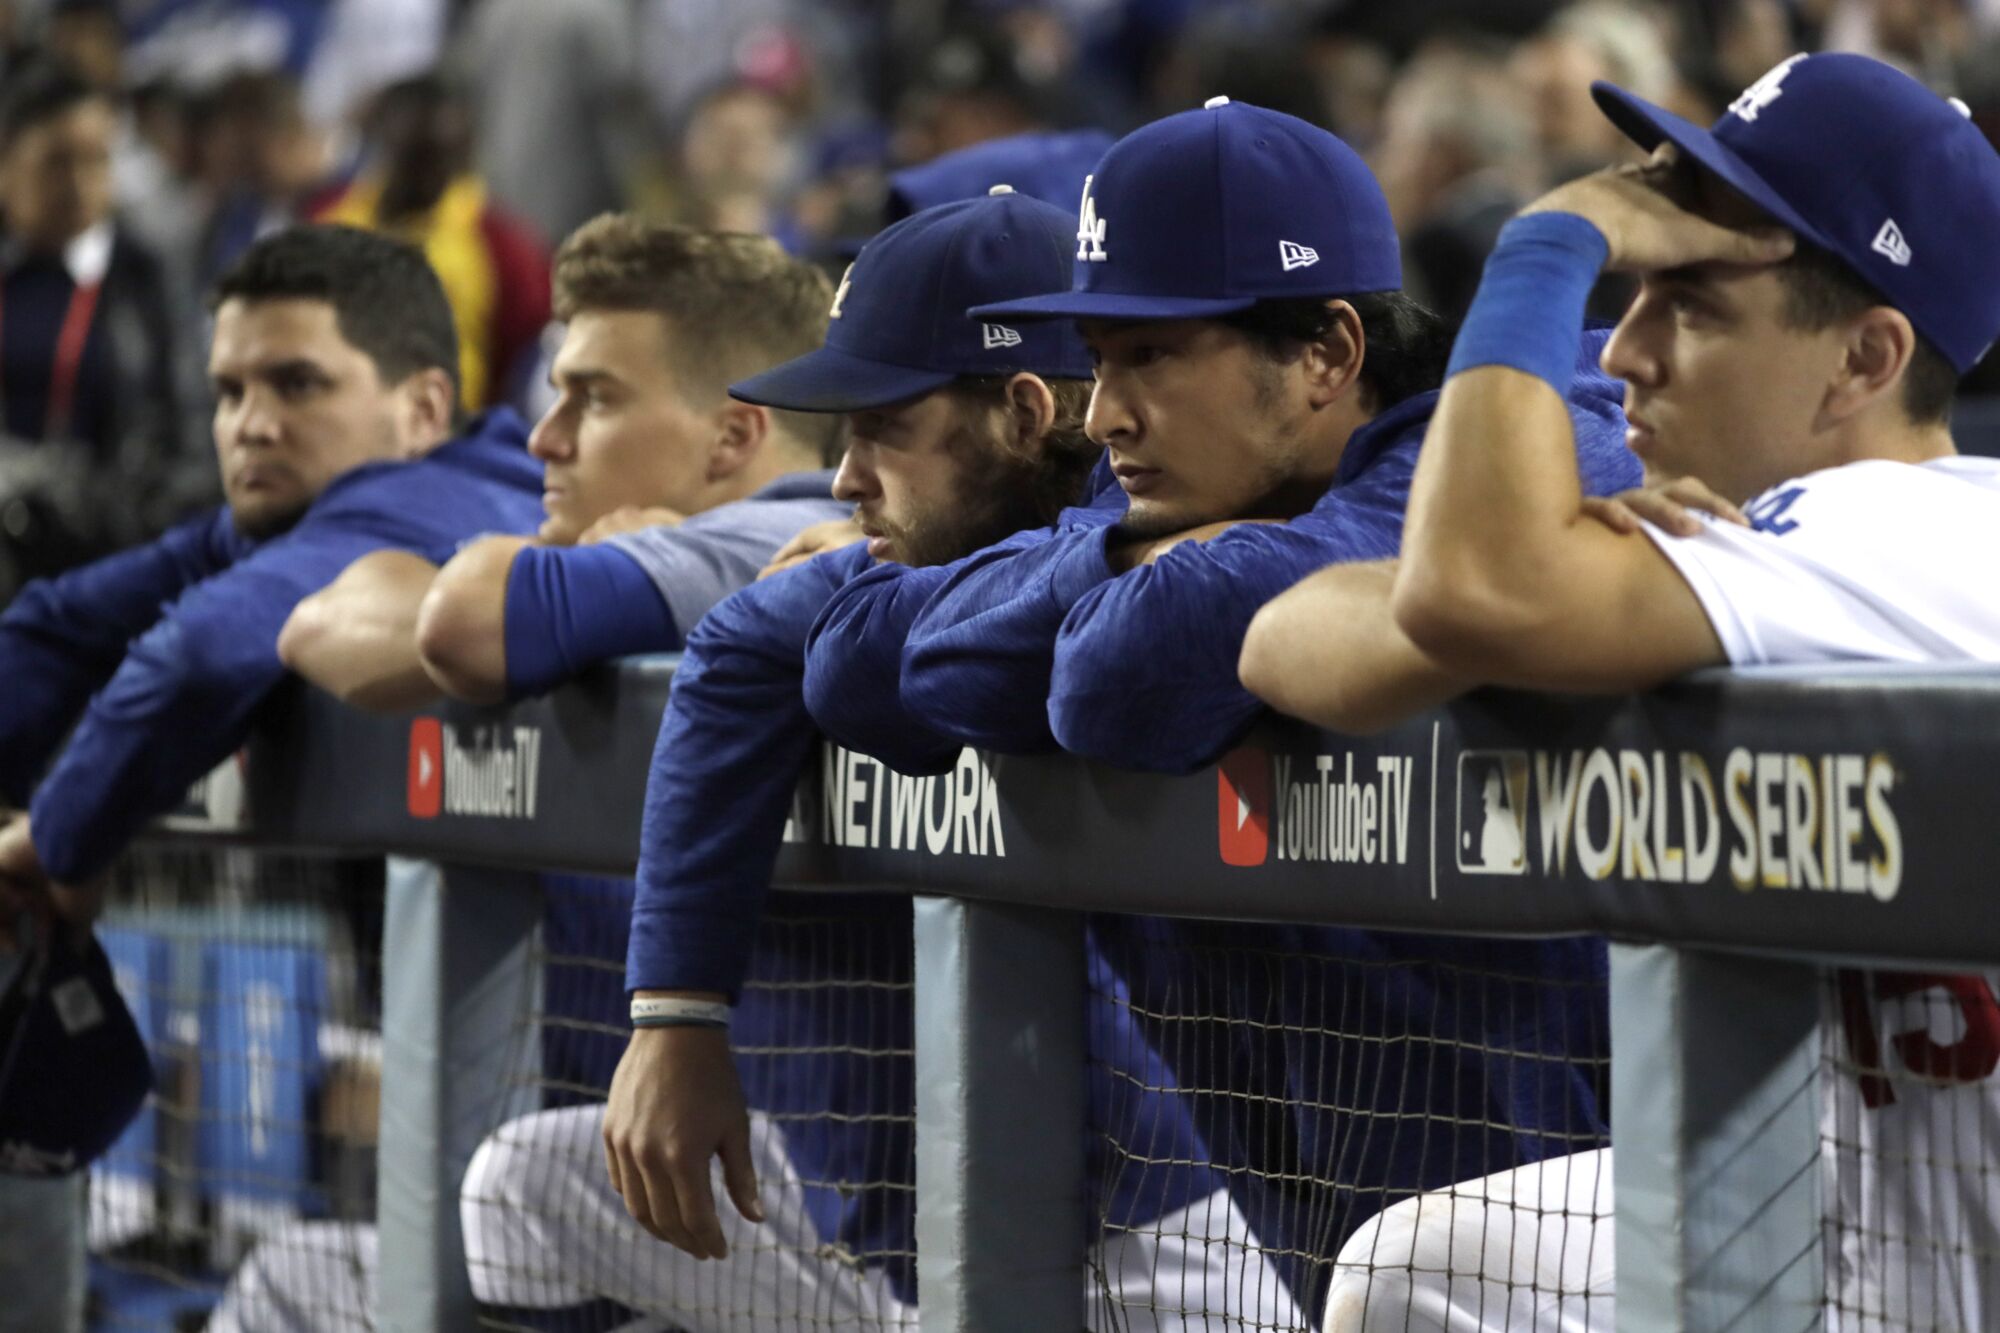 Austin Barnes, Yu Darvish, Clayton Kershaw and Enrique Hernandez watch the Astros celebrate on the field from their dugout